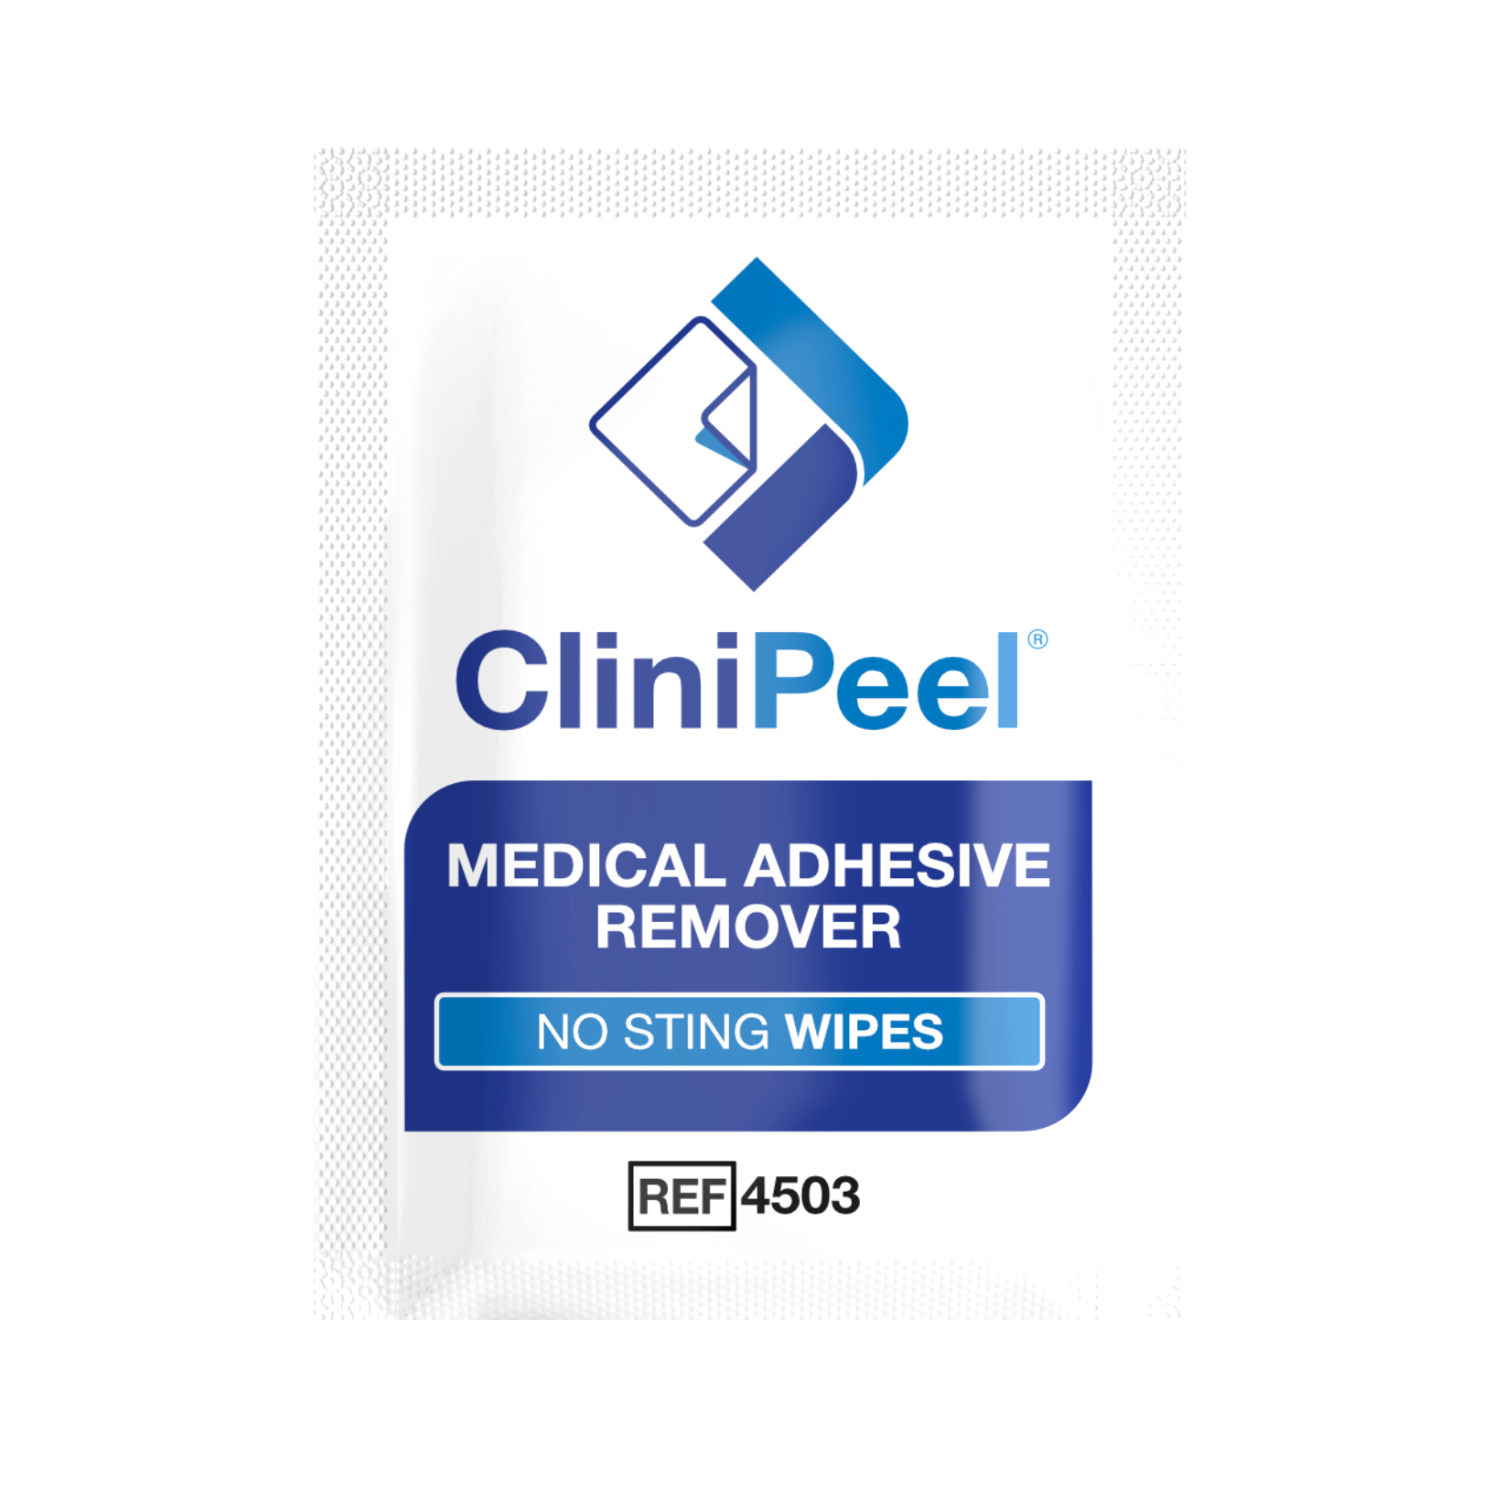 Medical Adhesive Remover Wipes - Welland Medical